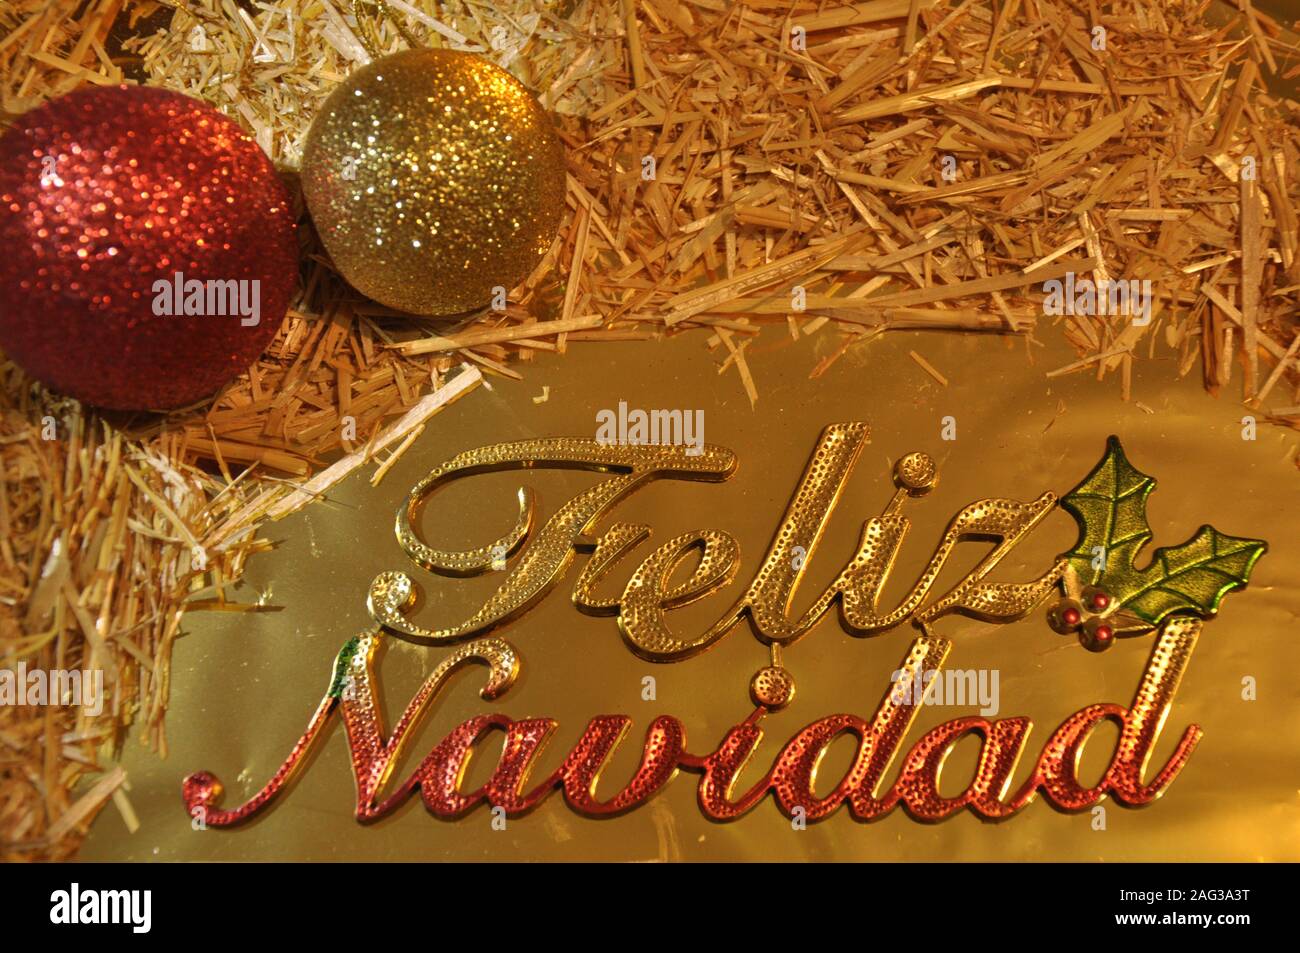 Merry Christmas in spanish latin lenguage. Christmas gretting card. Balls, straw and golden ornaments. Stock Photo